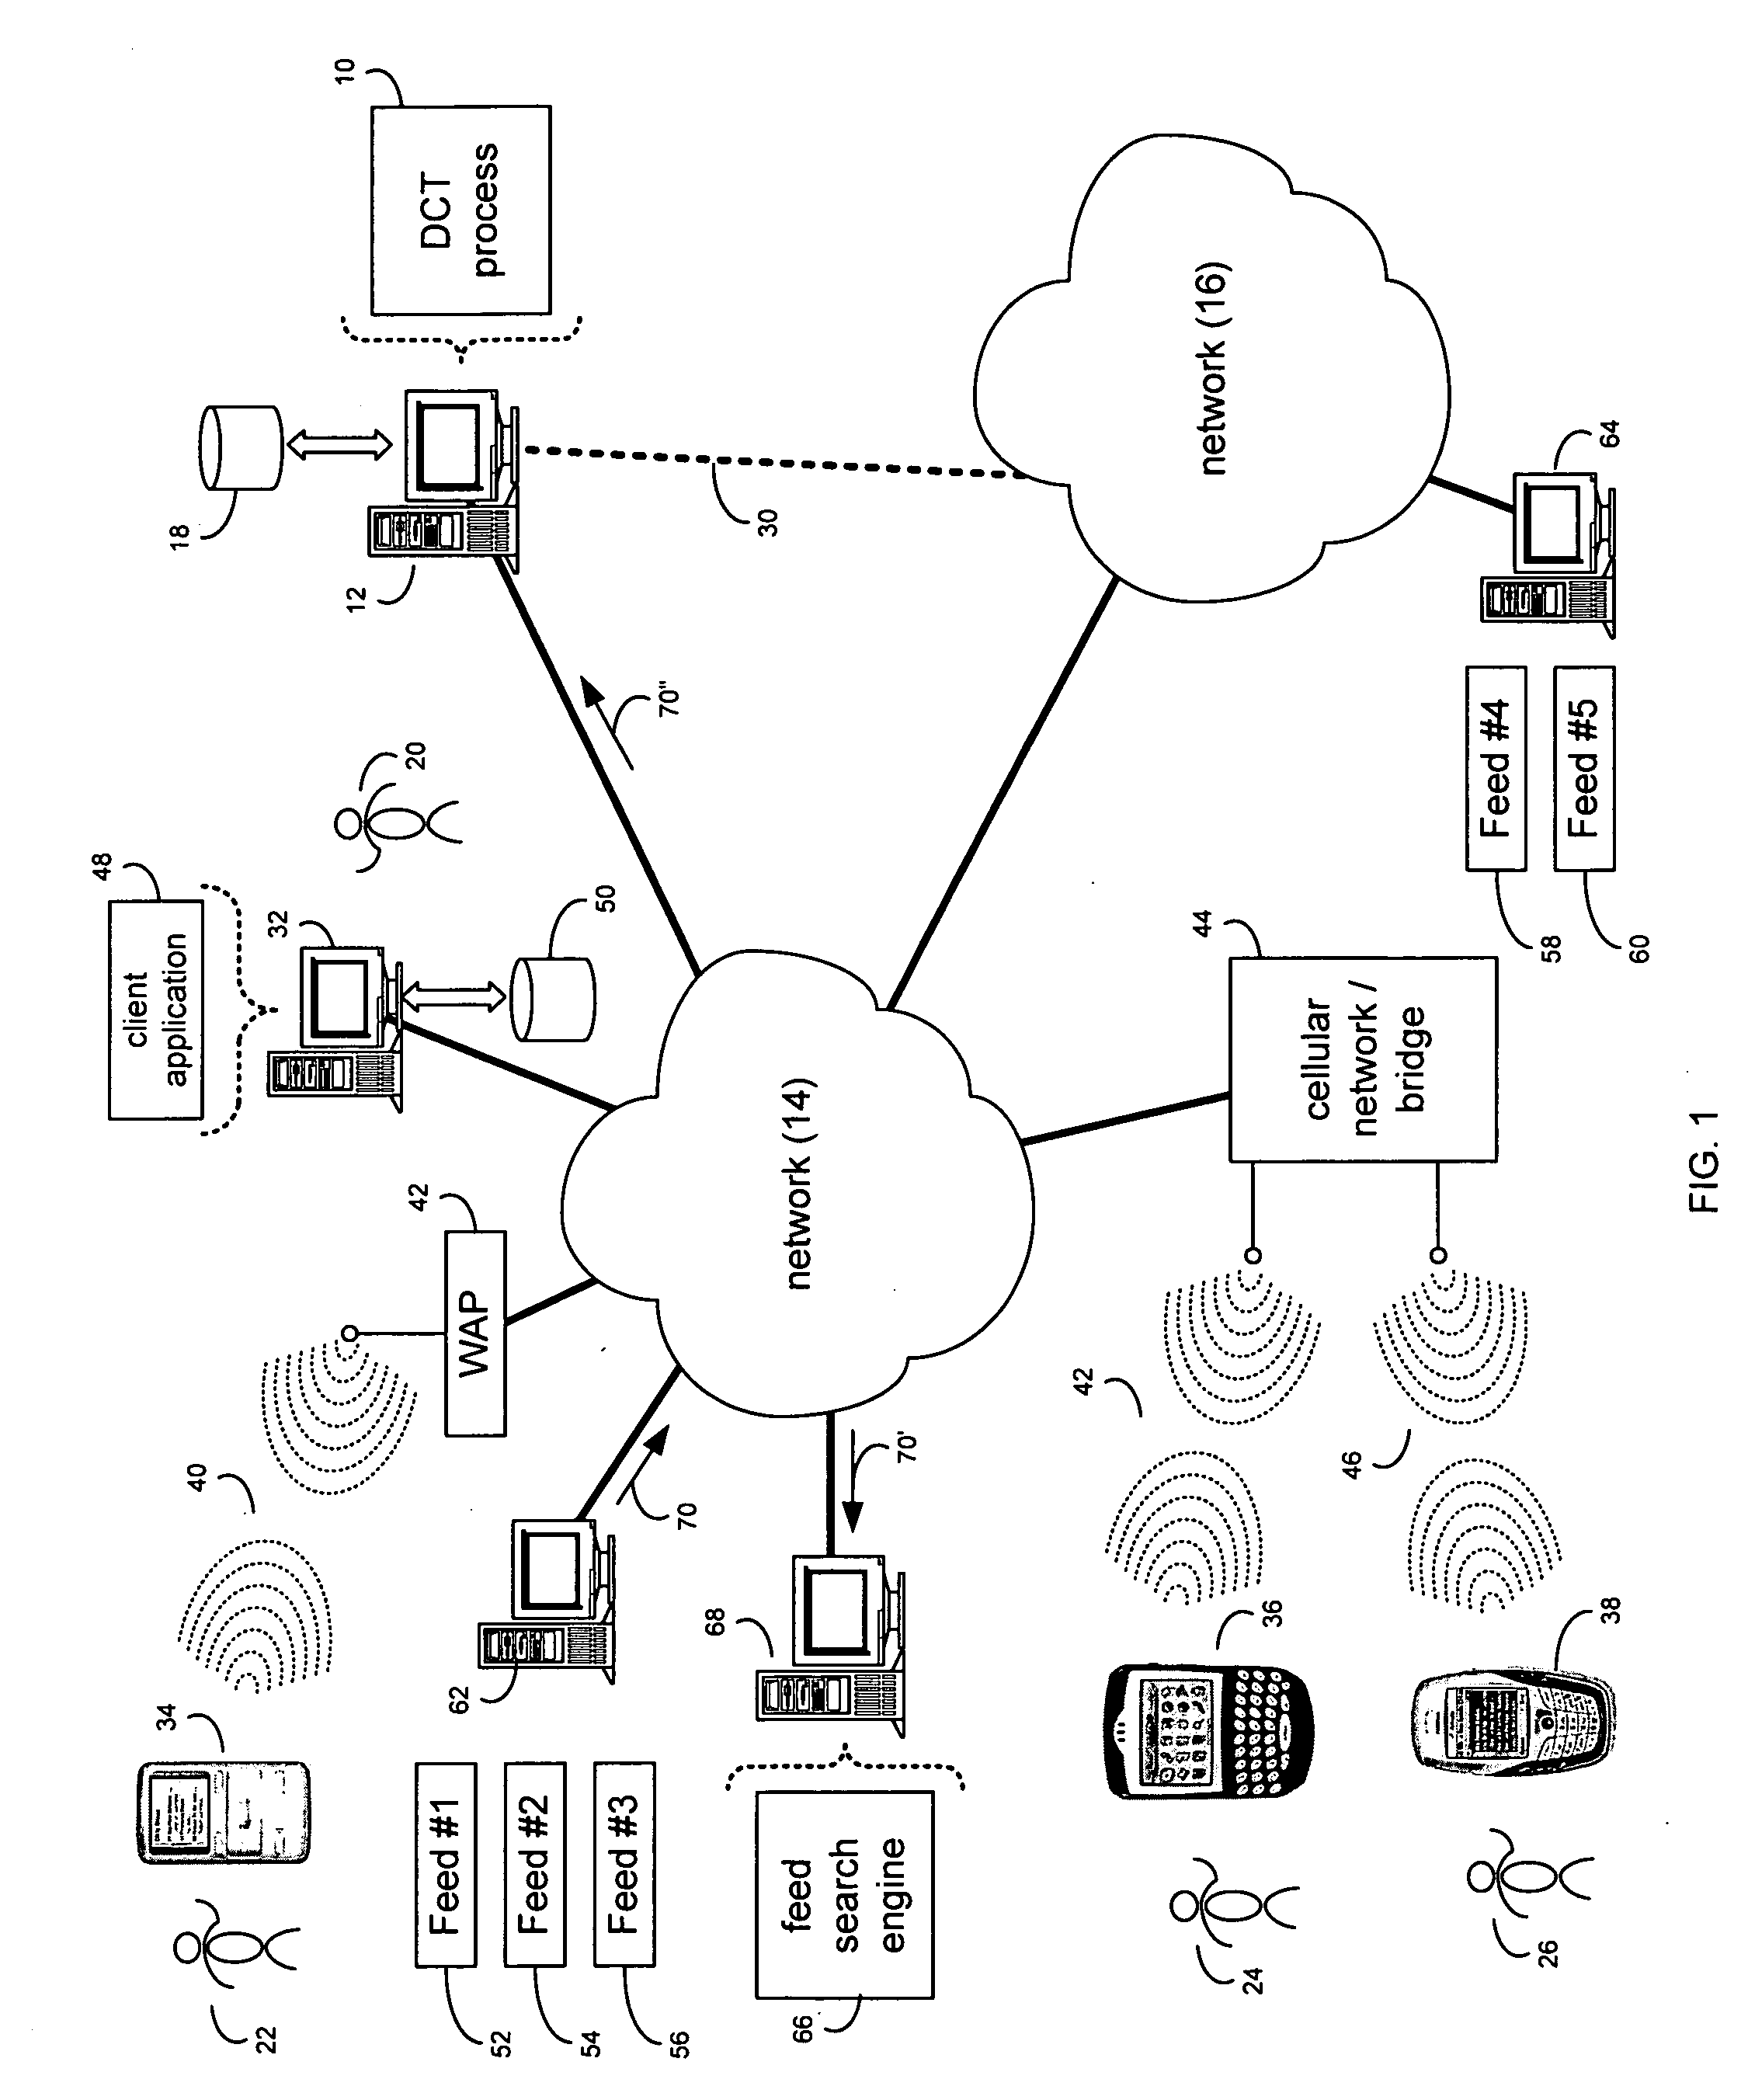 System and method for automatically obtaining web feed content